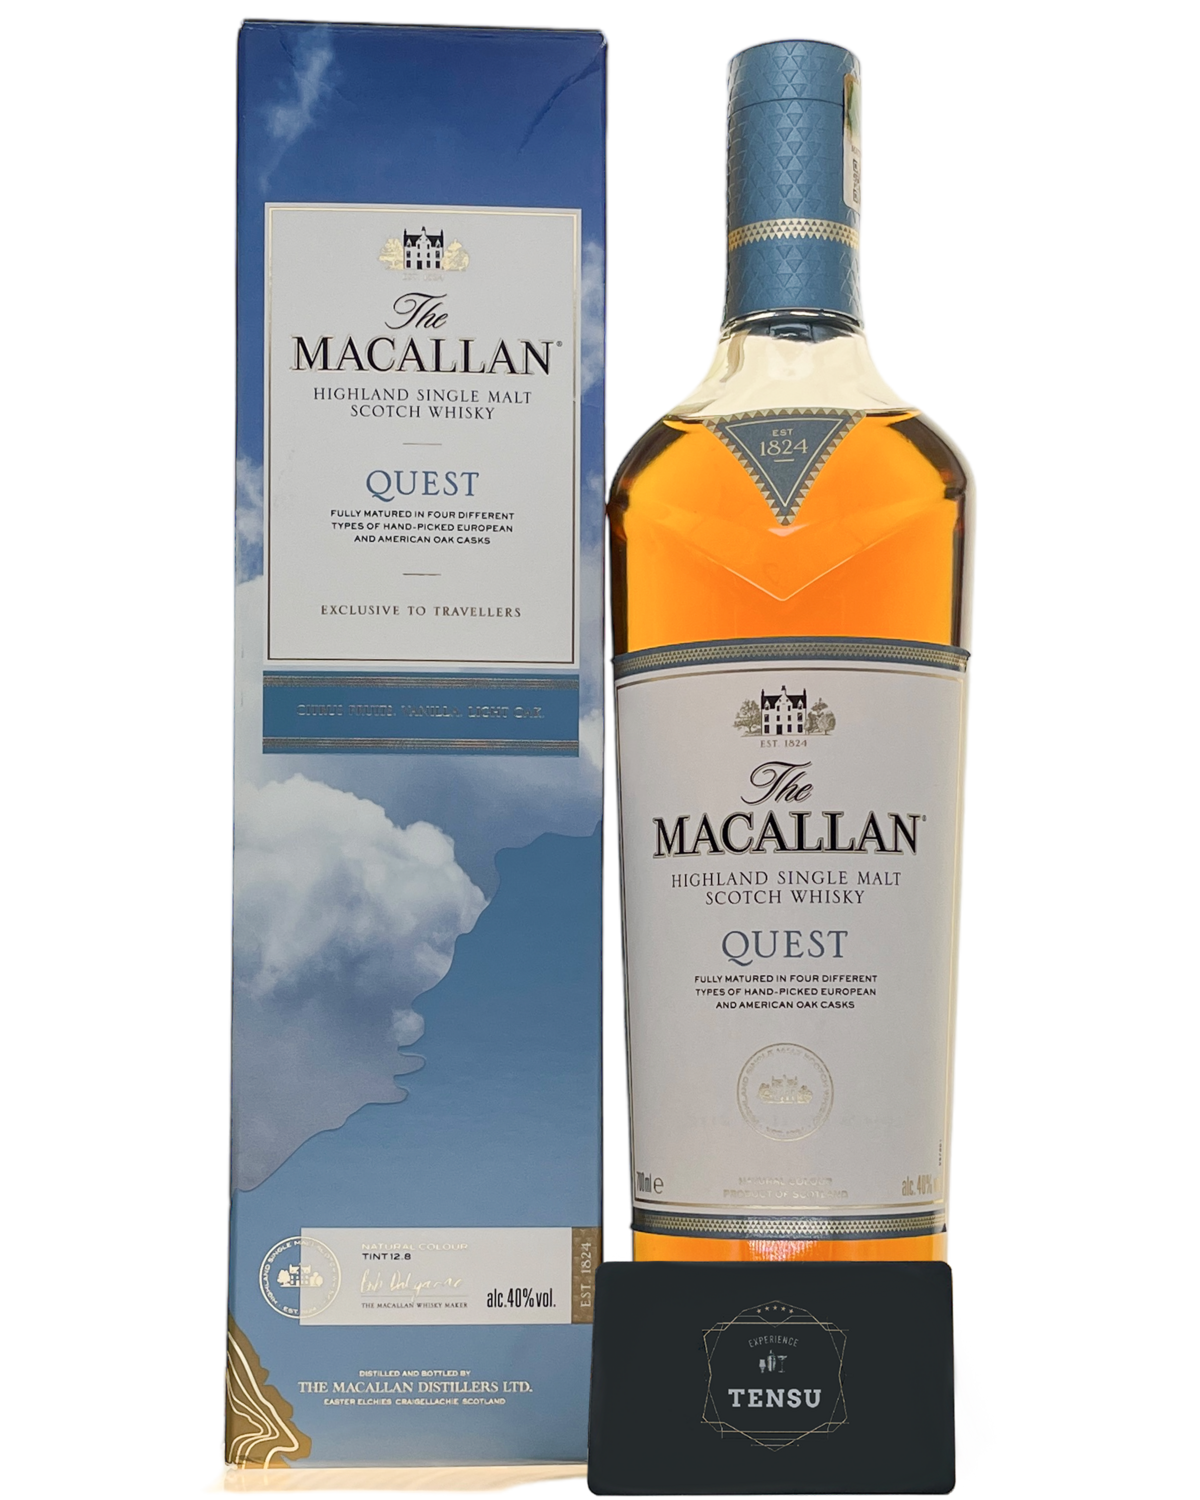 The Macallan Quest (WQF001) Exclusive to Travellers 40.0 "OB"